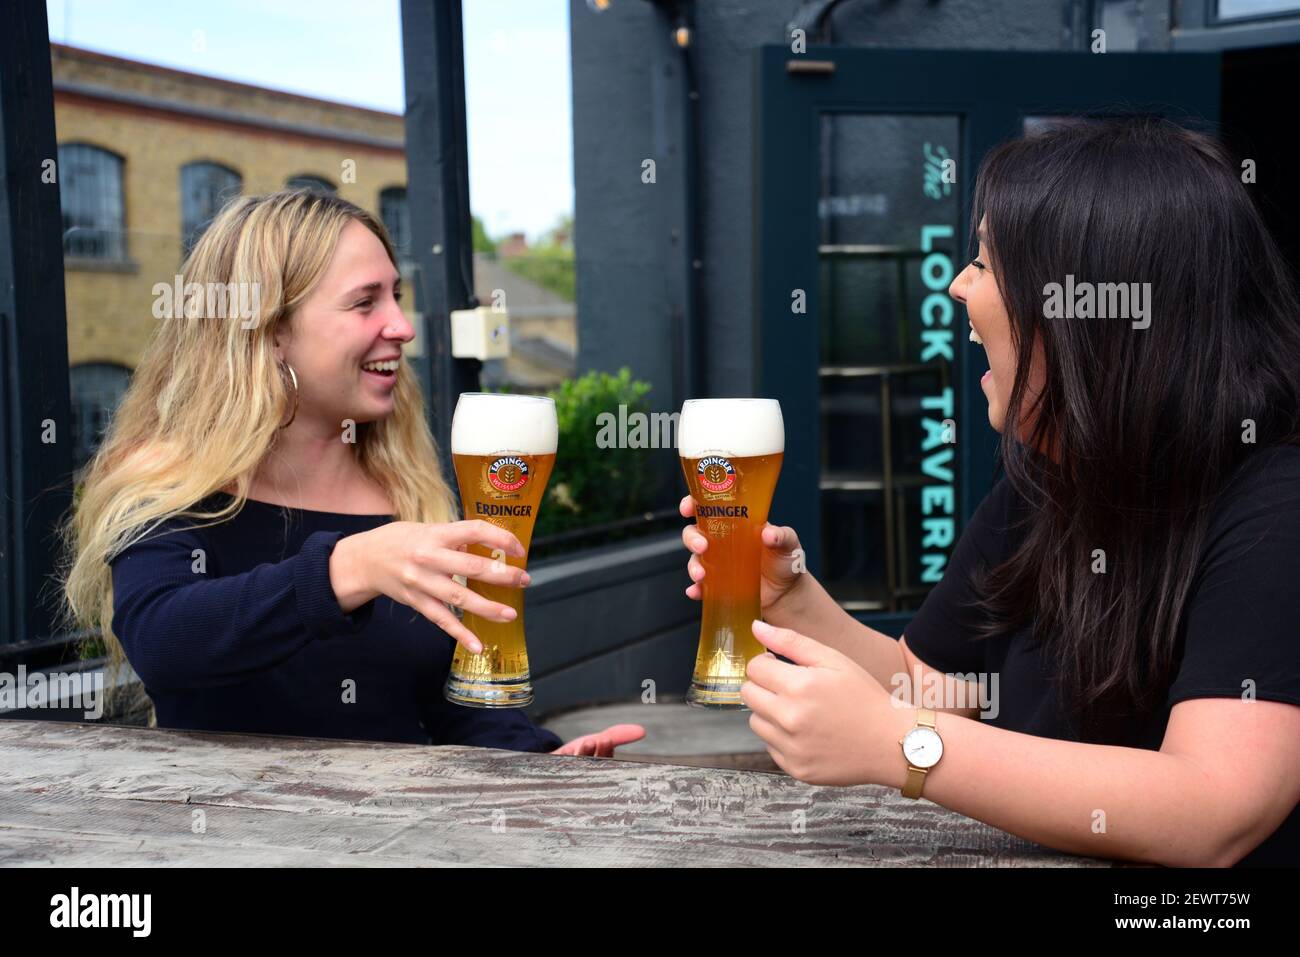 Two women drinking beer and laughing at a pub in Camden, London Stock Photo